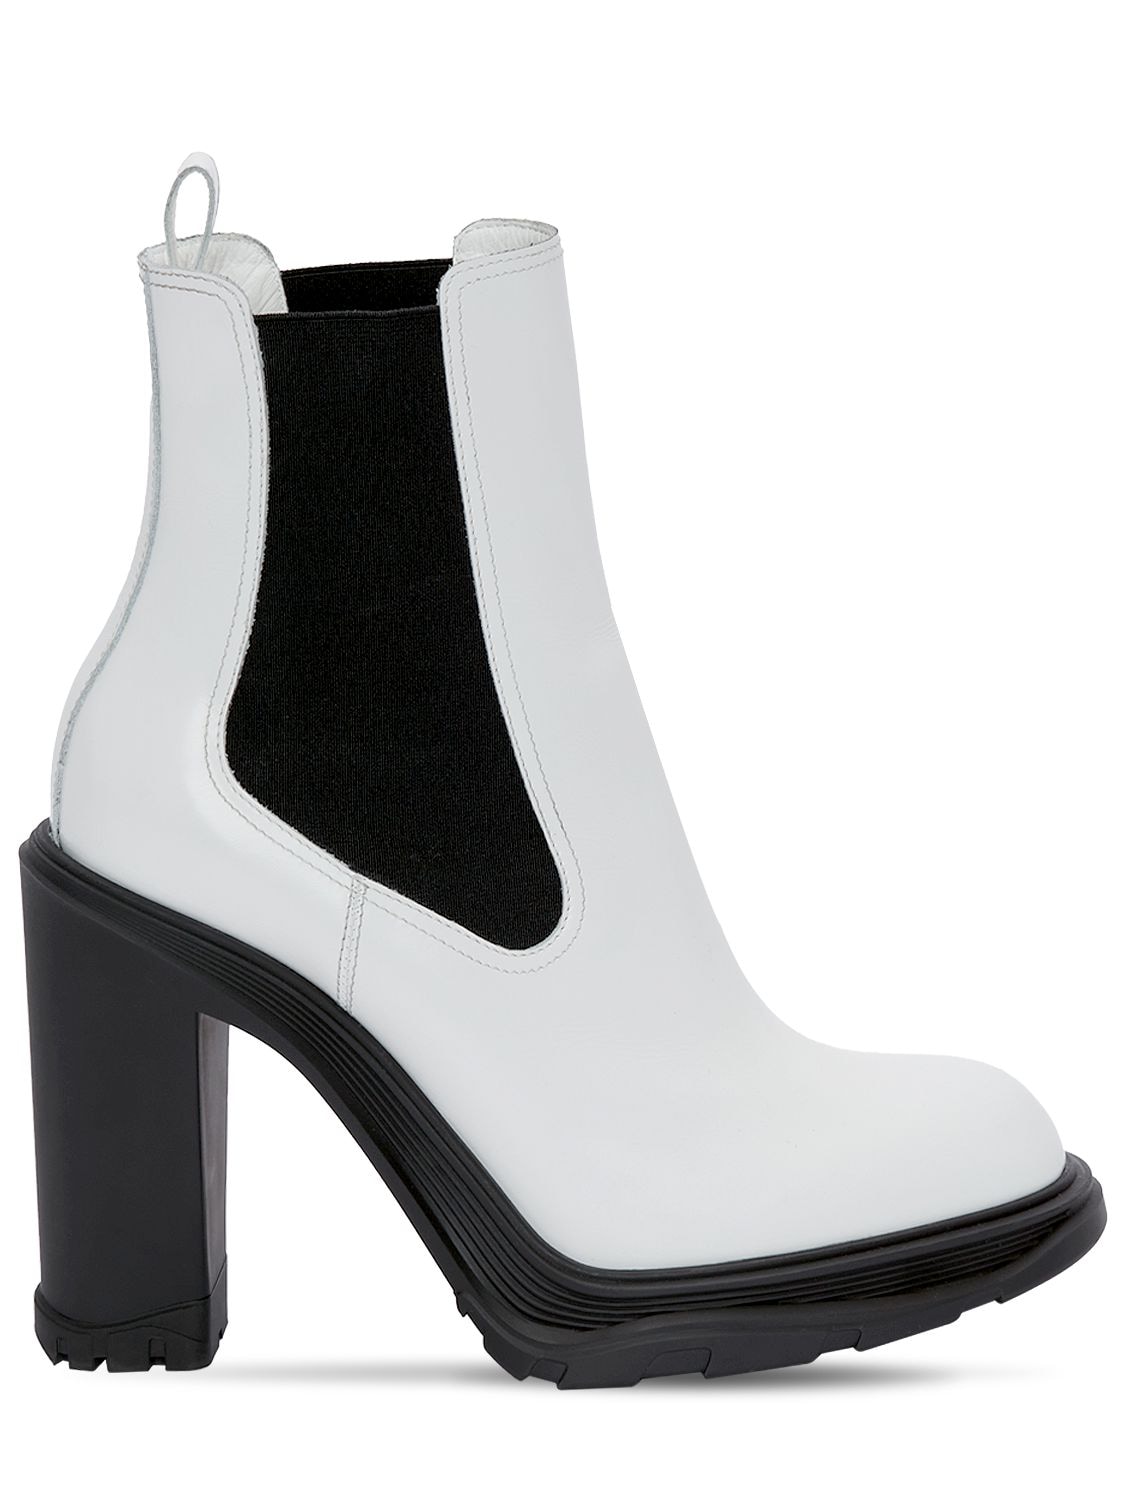 ALEXANDER MCQUEEN 120mm Brushed Leather Ankle Boots